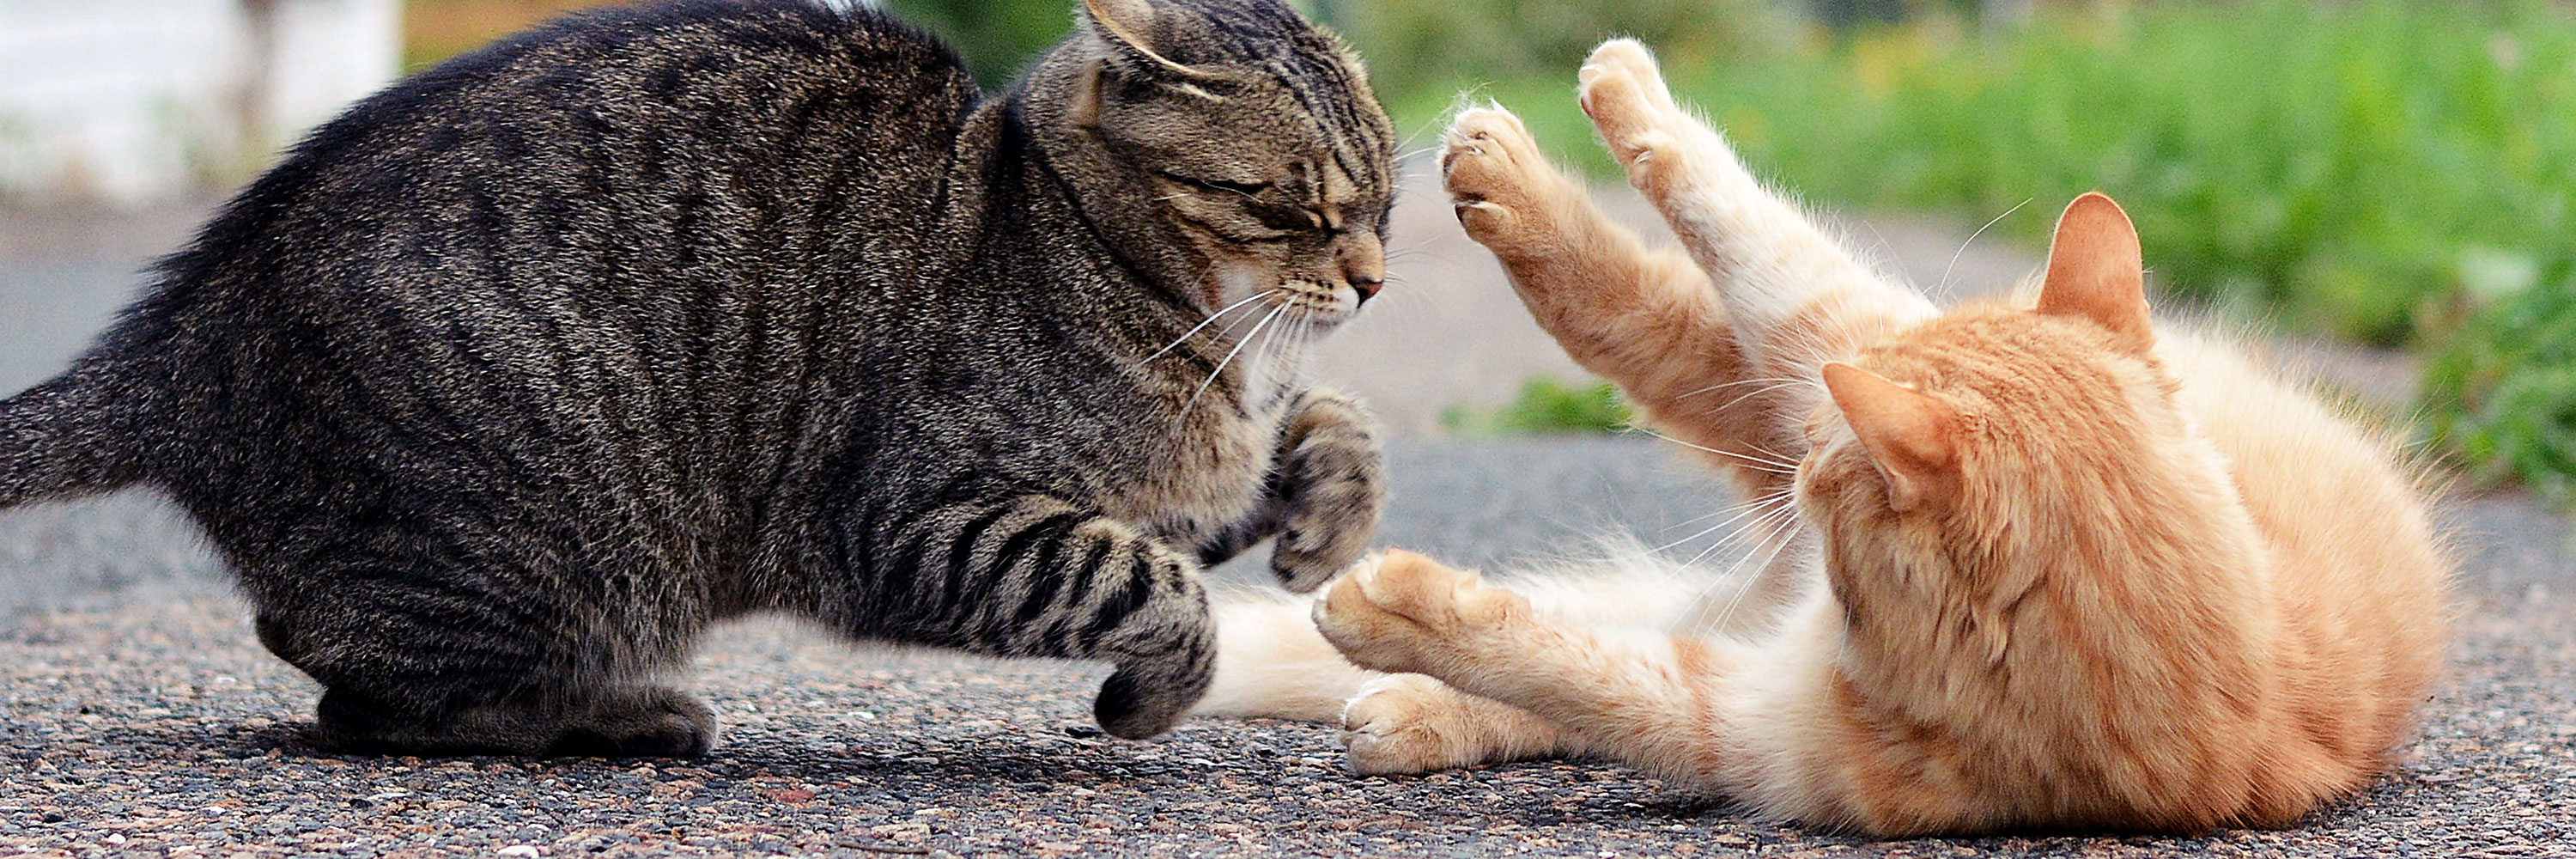 Veterinary Practice Cat Limping After Fight